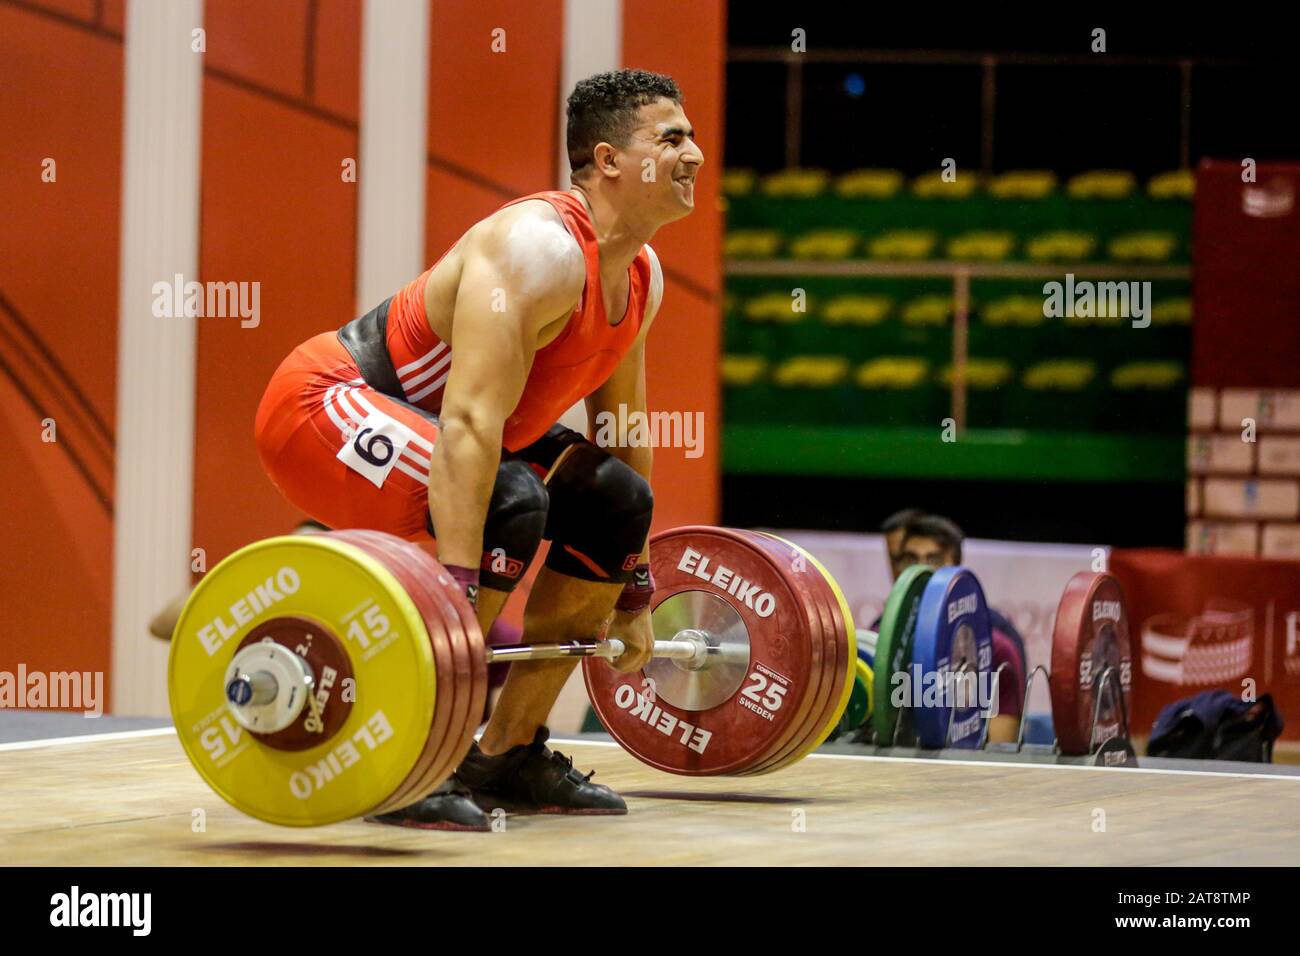 Rome, Italy, 31 Jan 2020, bacha aymen (tun) 109 kg category during IWF Weightlifting World Cup 2020 - Weightlifting - Credit: LPS/Claudio Bosco/Alamy Live News Stock Photo